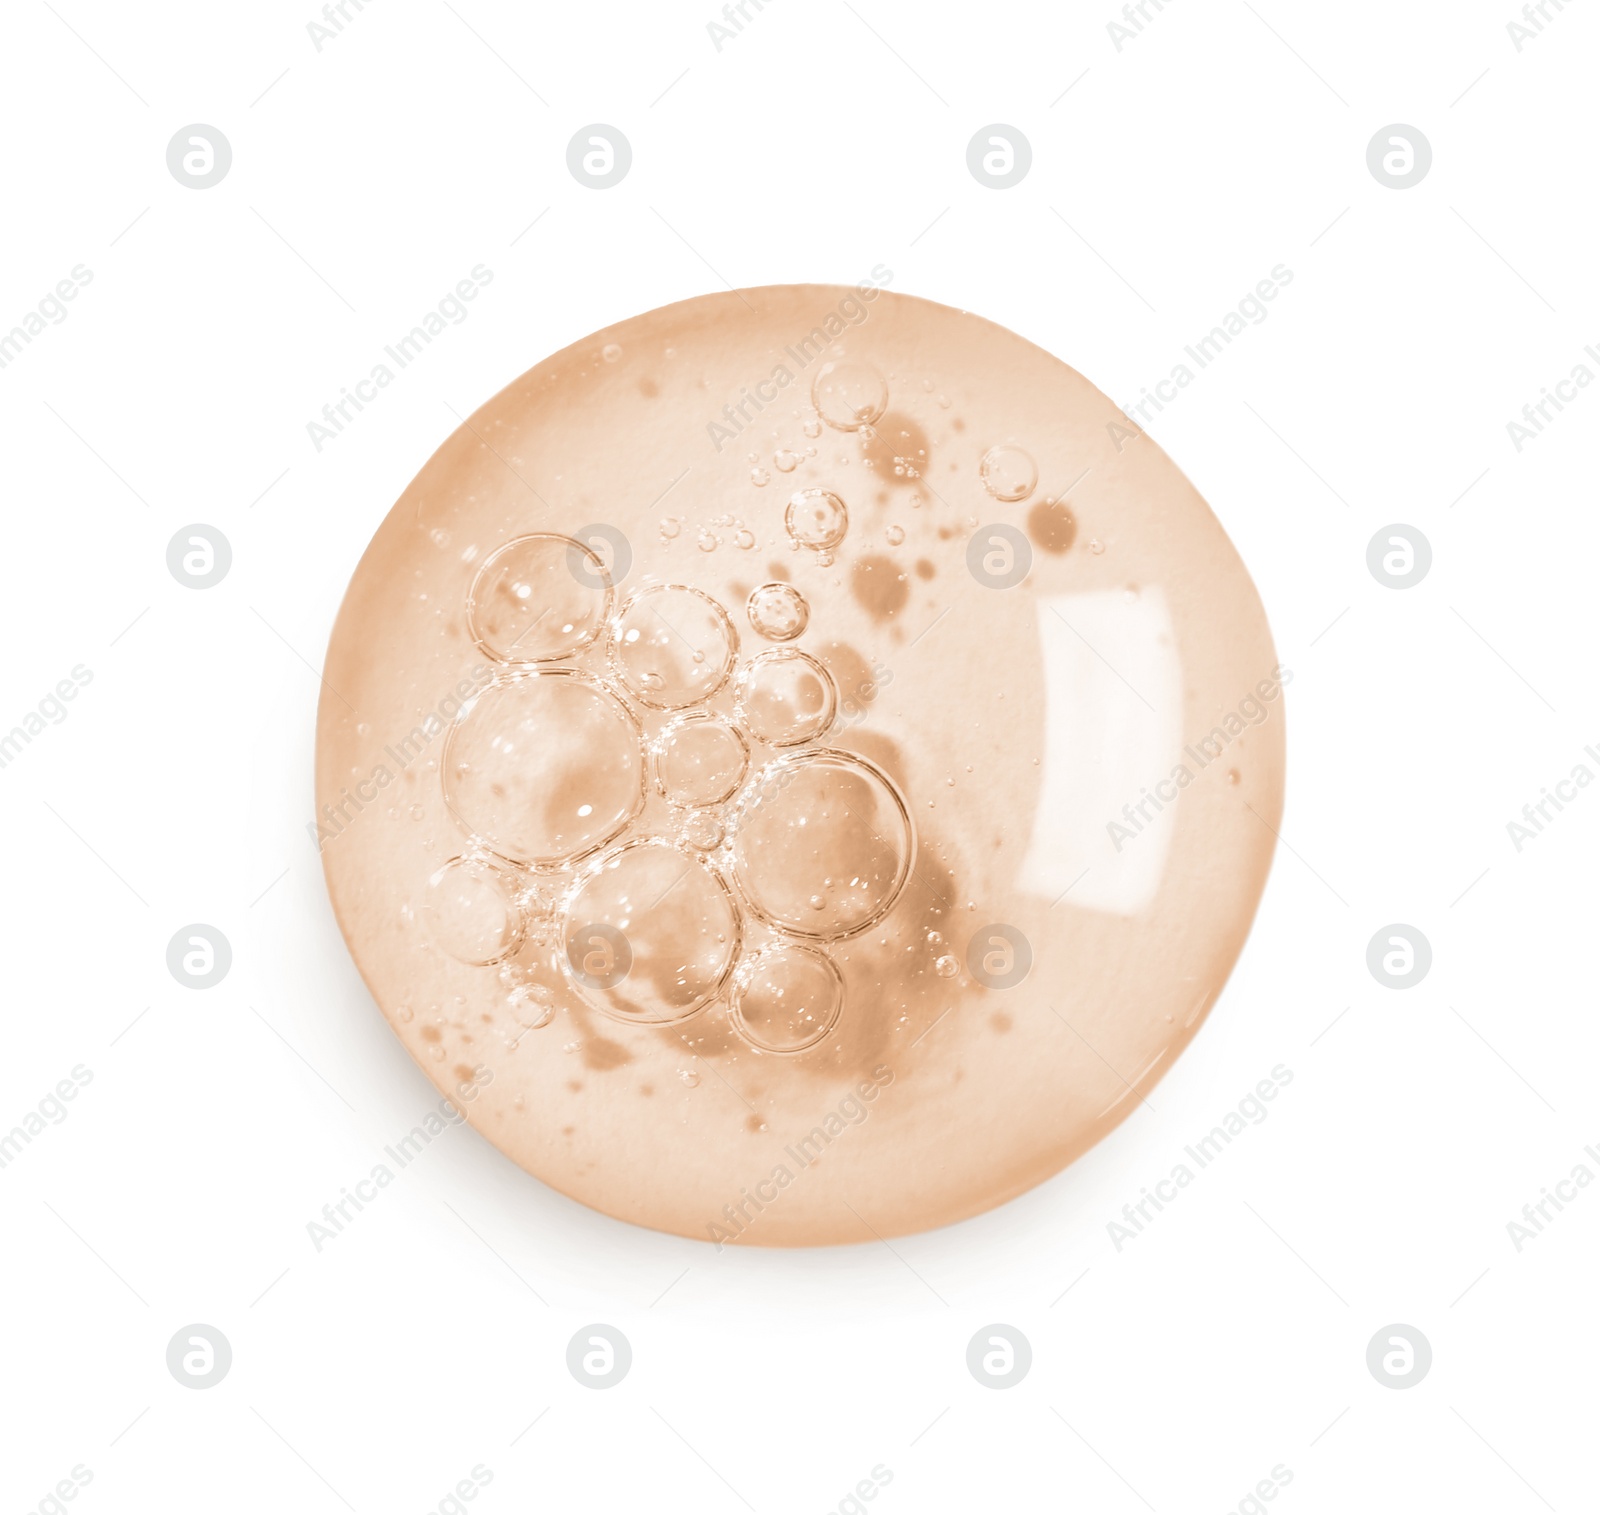 Image of Serum drop on white background, top view. Skin care product